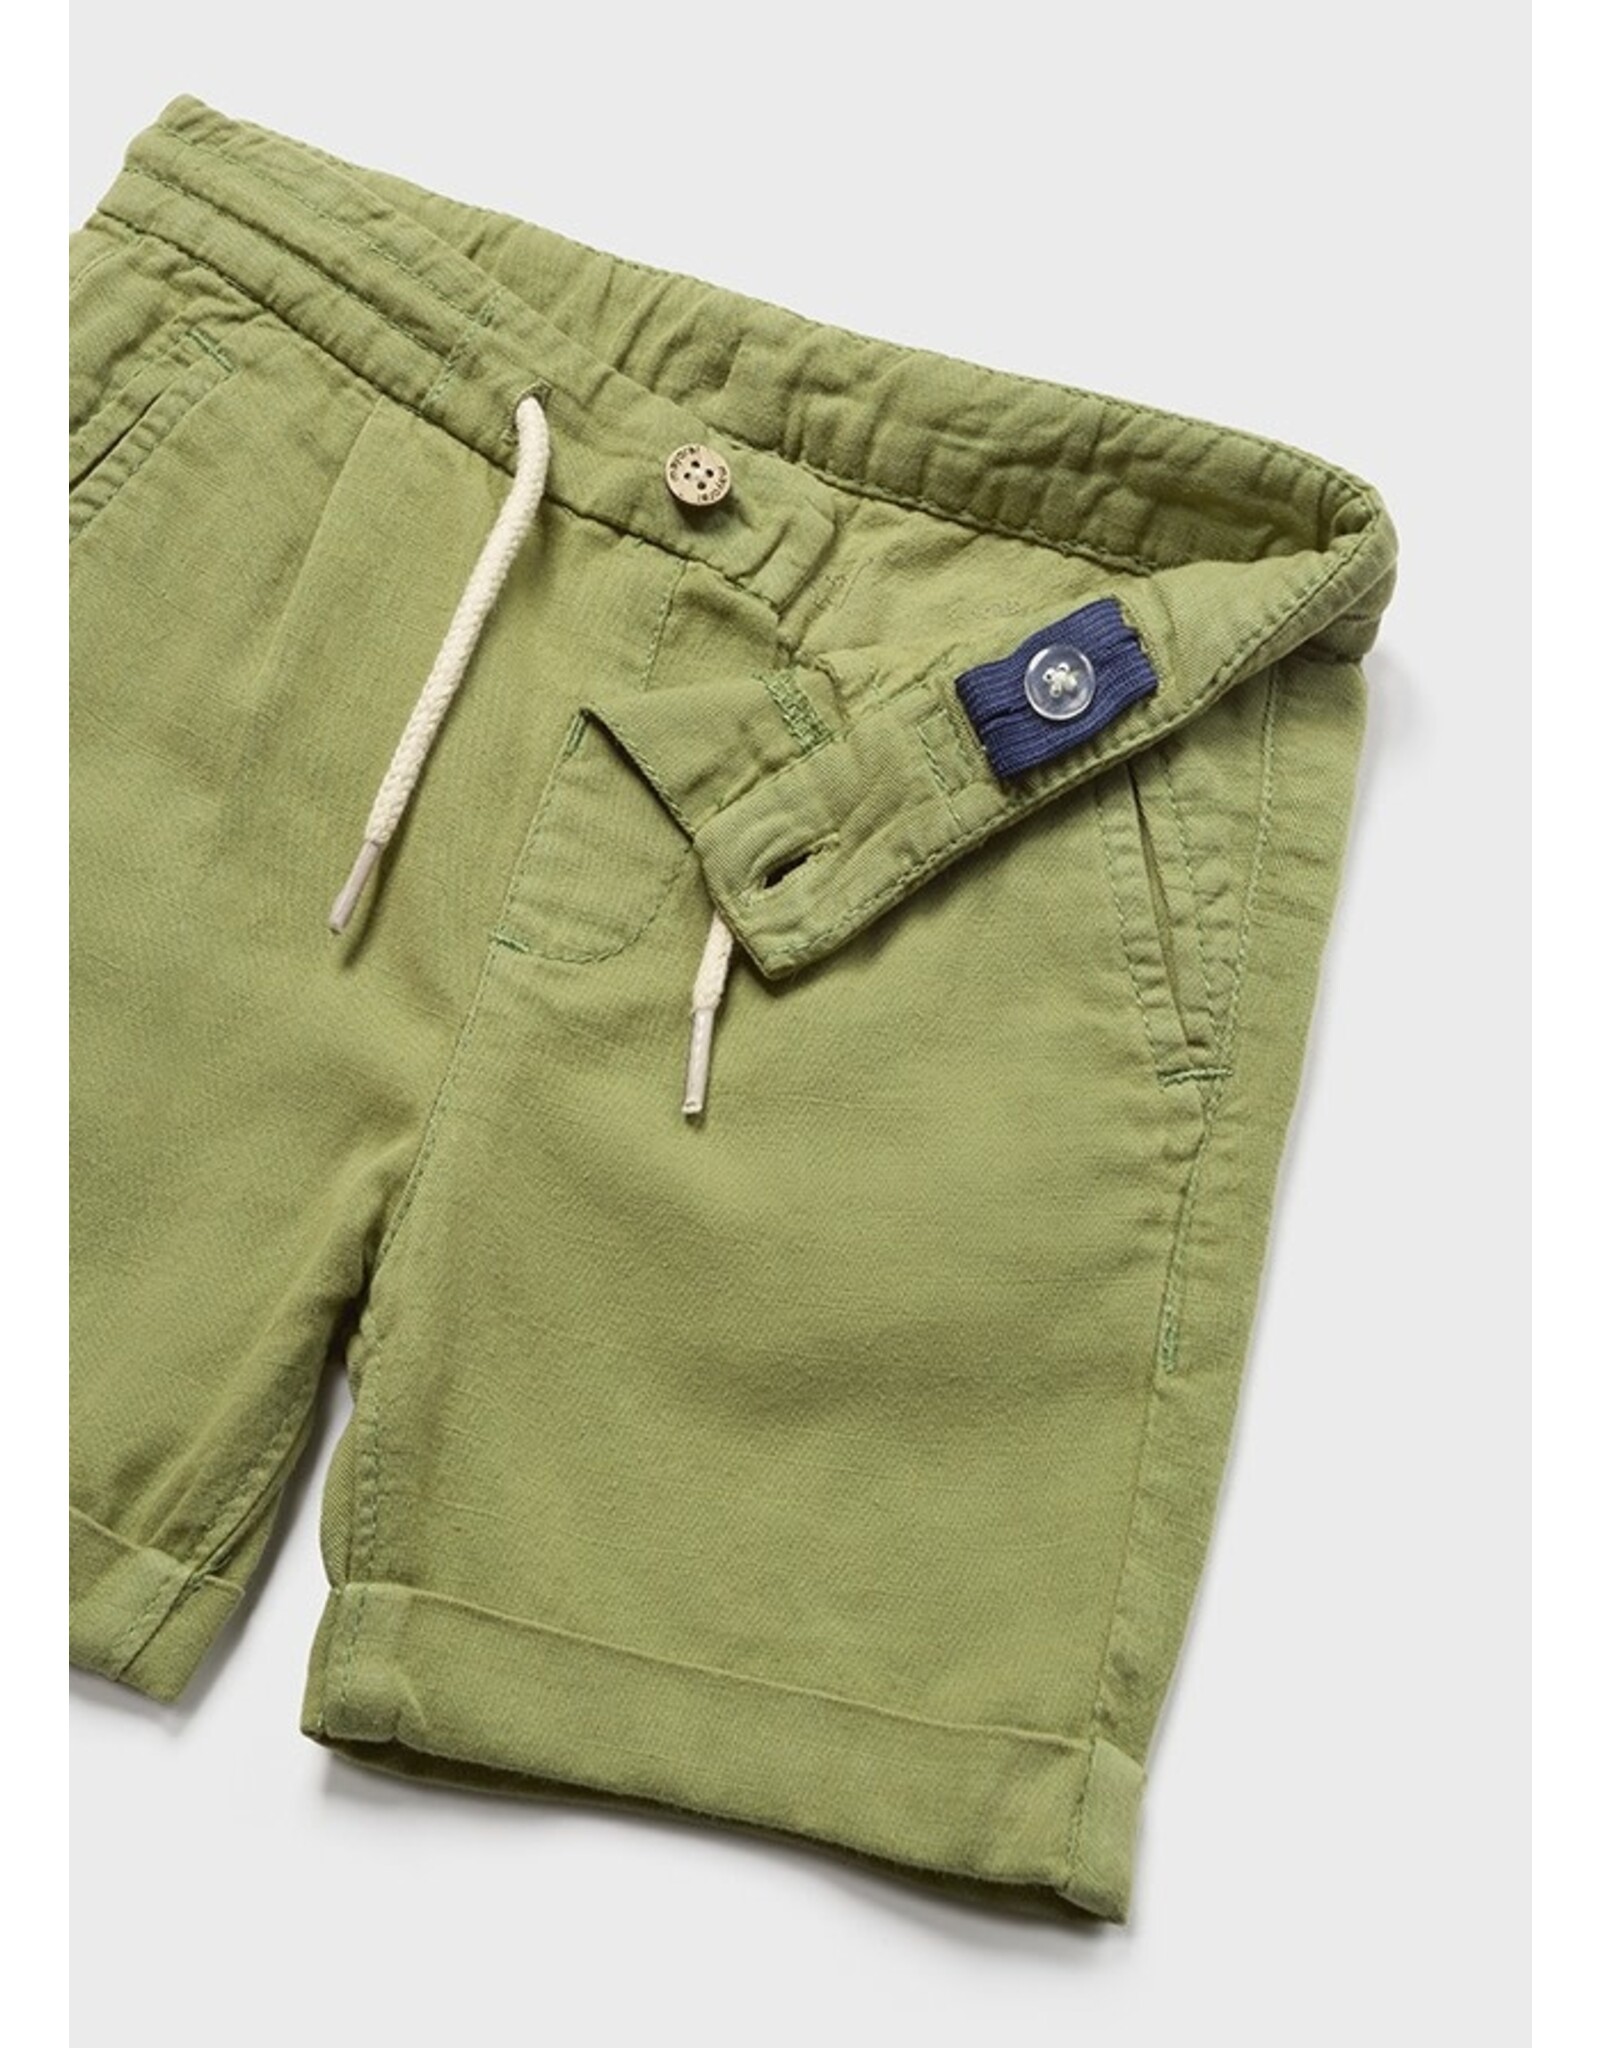 Mayoral Jungle Linen Relax Shorts